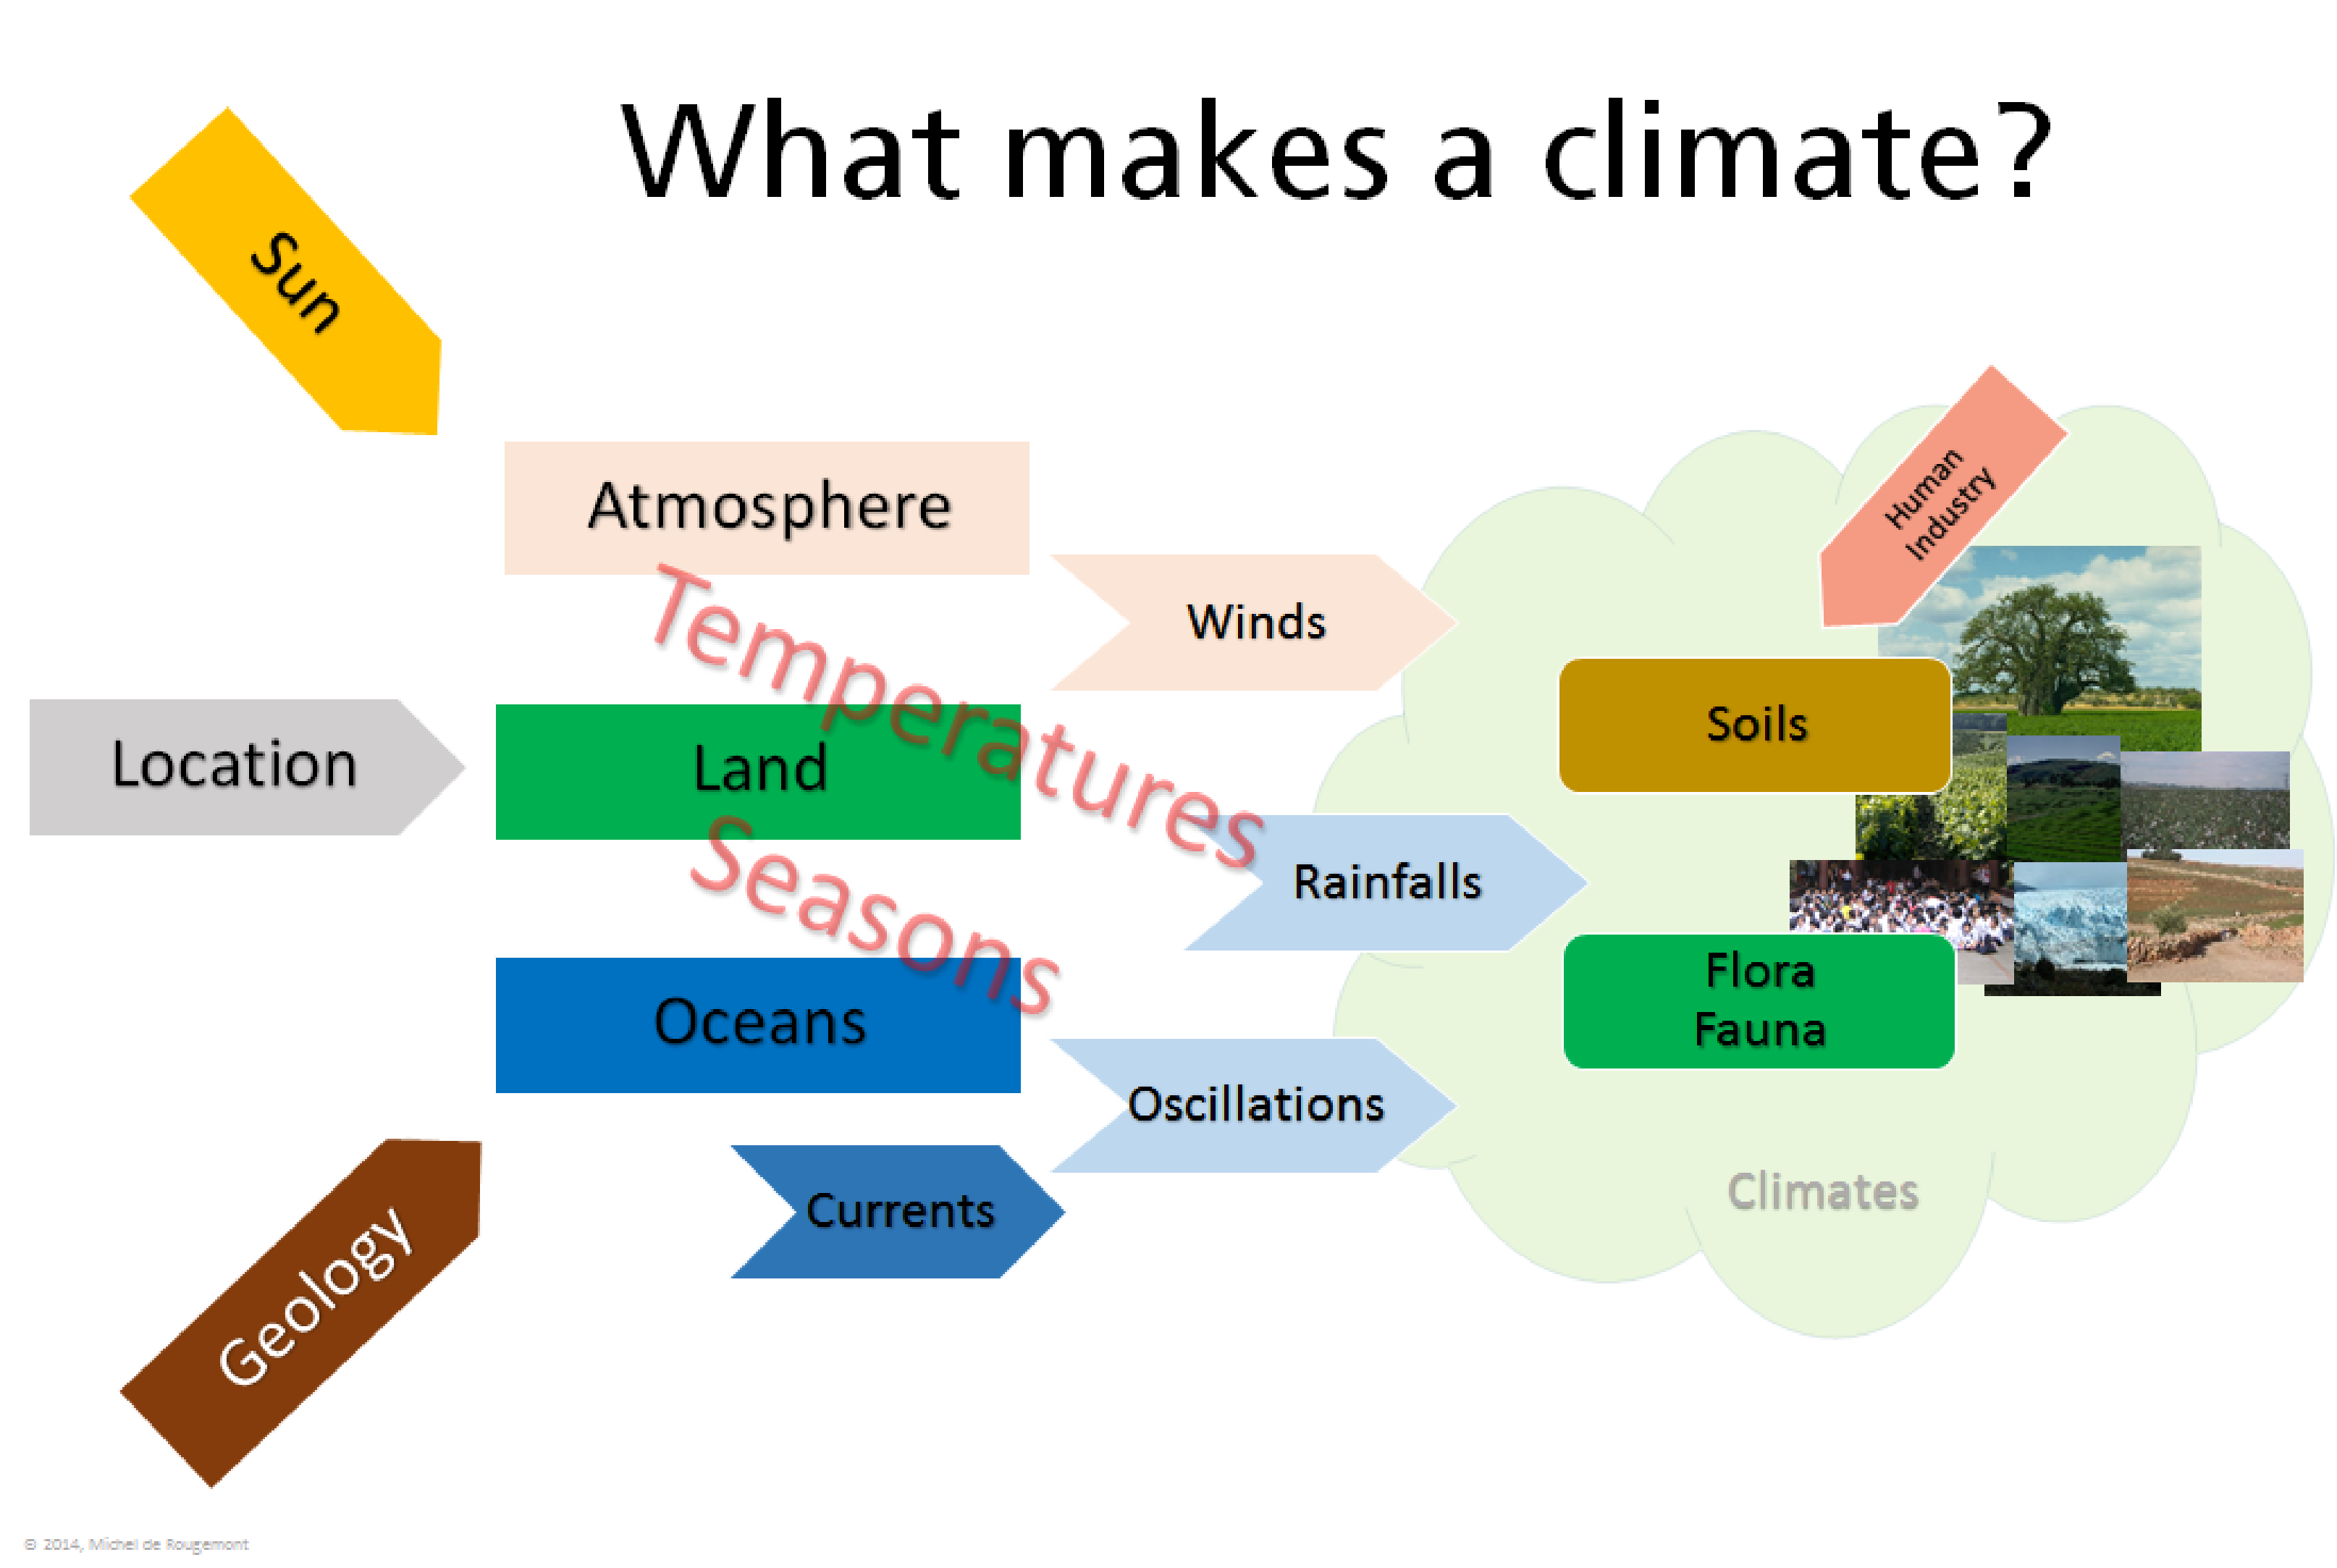 What makes a climate